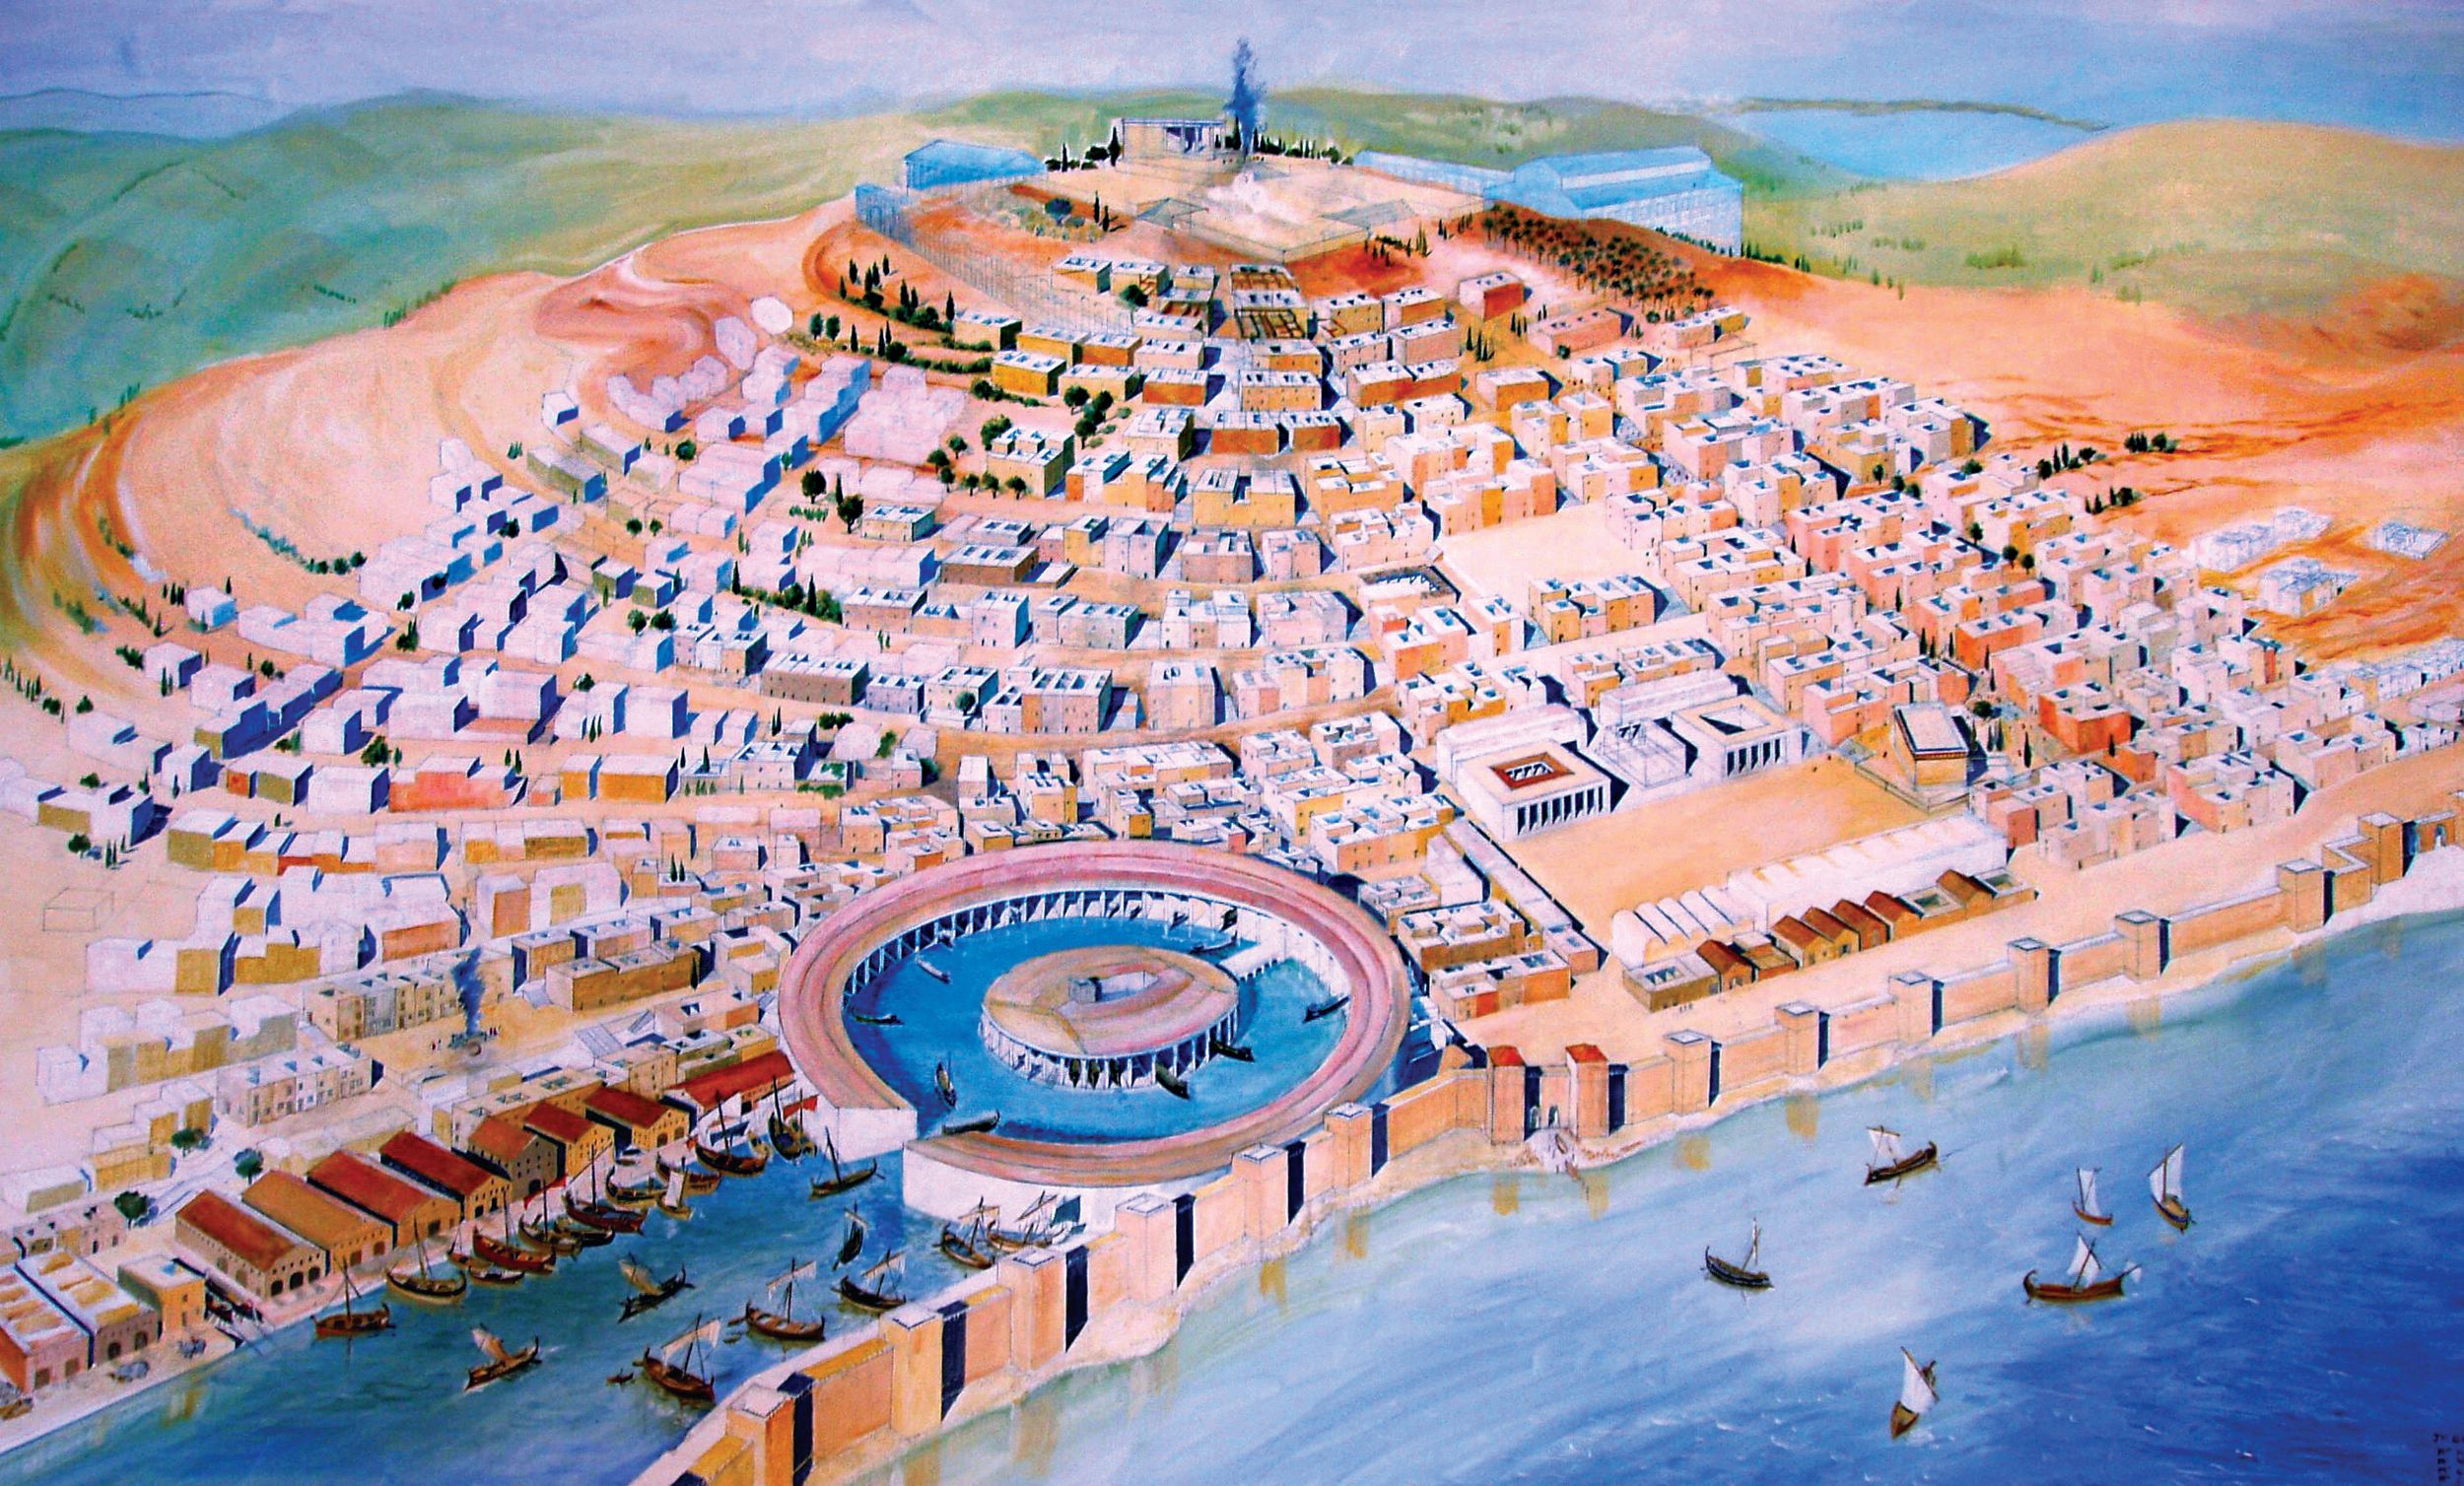 Built on the coast of Africa in what is now Tunisia, the affluent city of Carthage was one of the most important trading hubs of the ancient world, with the most powerful navy in the western Mediterranean before the First Punic War.